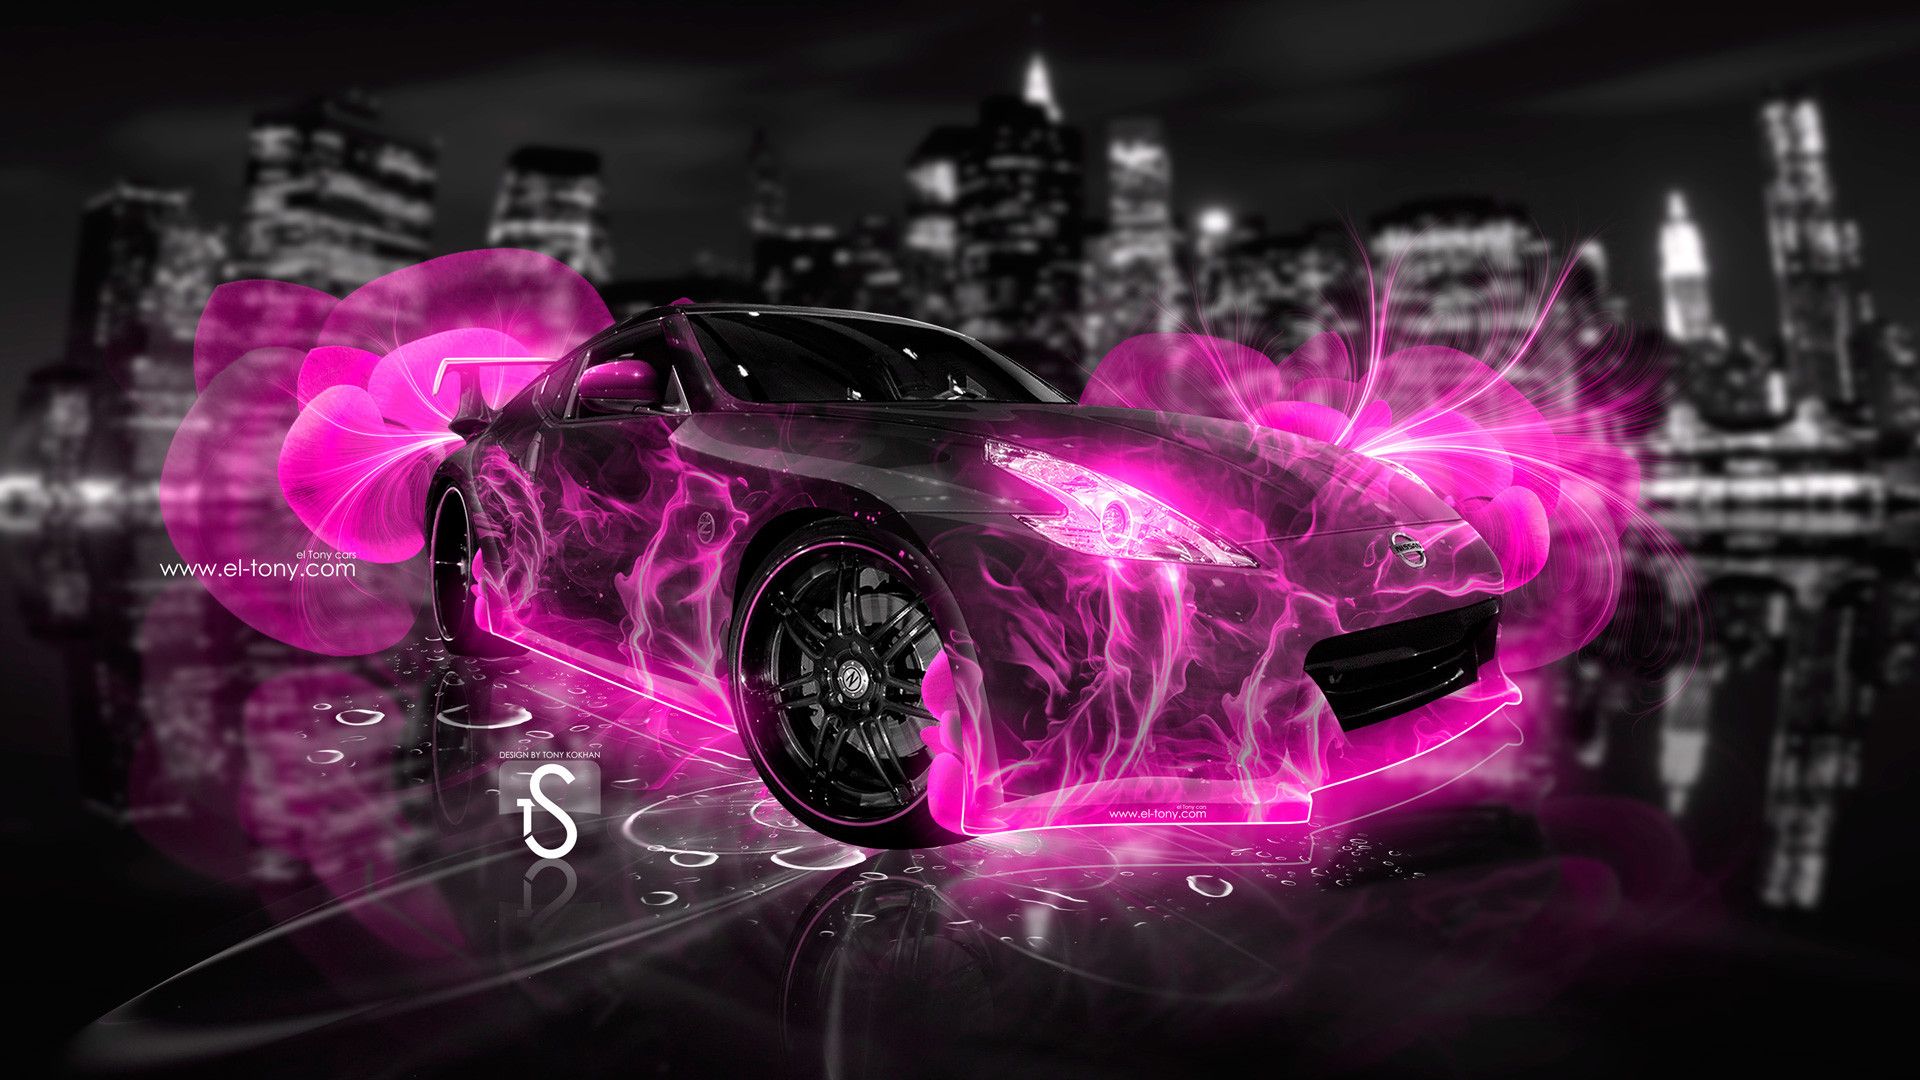 Pink Car wallpapers for desktop download free Pink Car pictures and  backgrounds for PC  moborg